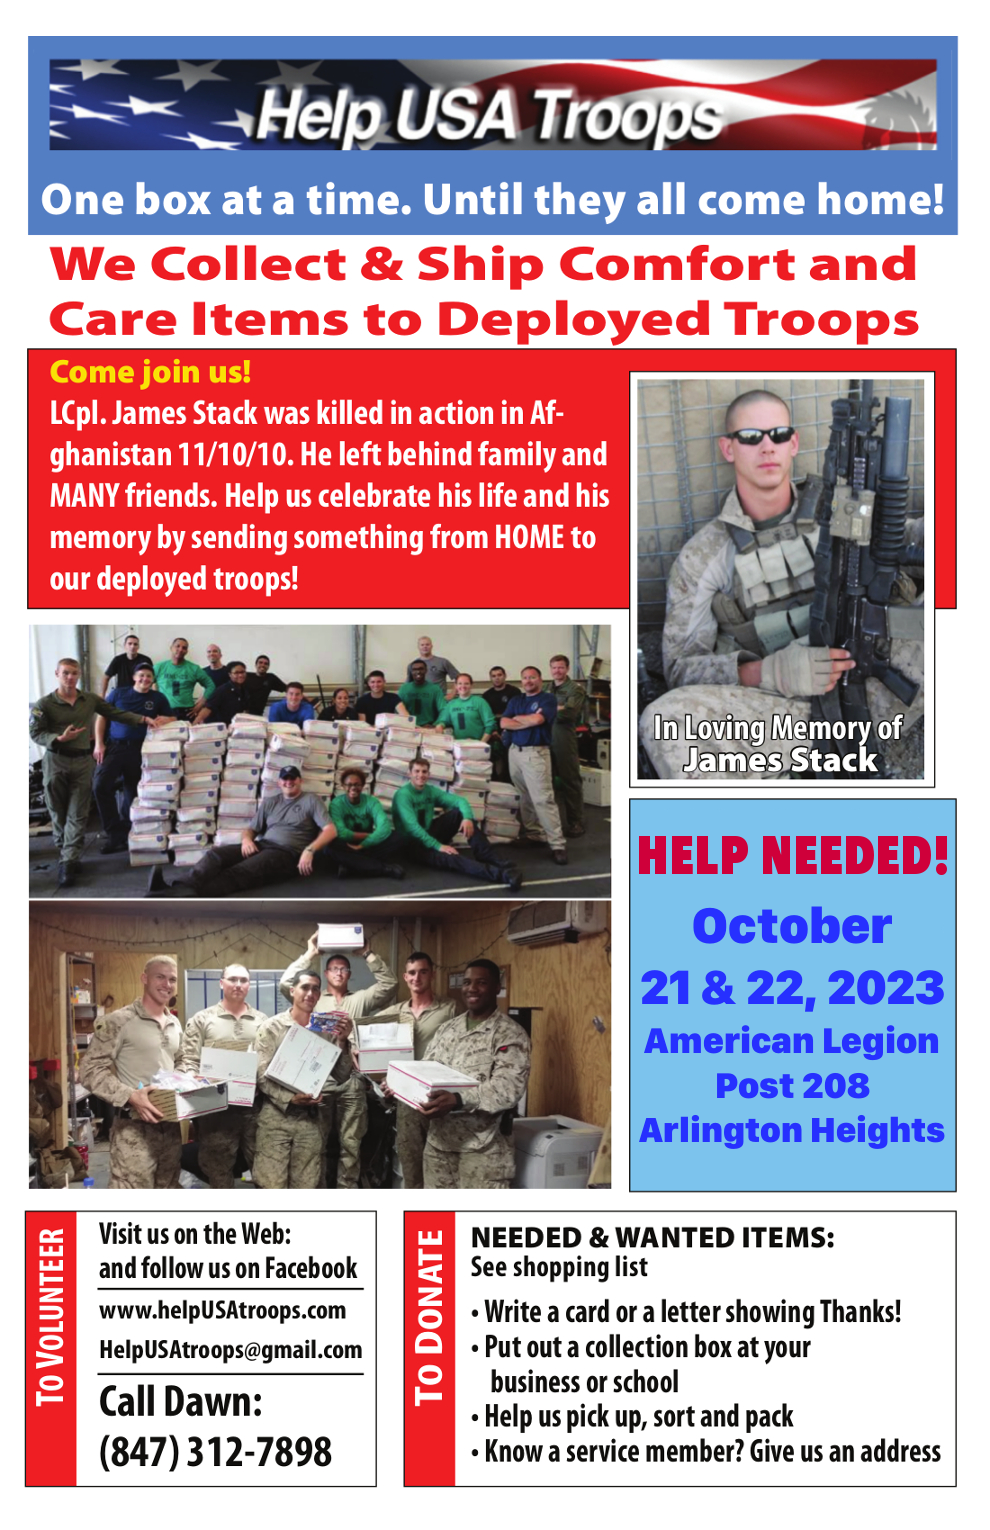 Supporting Our Troops One Box at a Time!